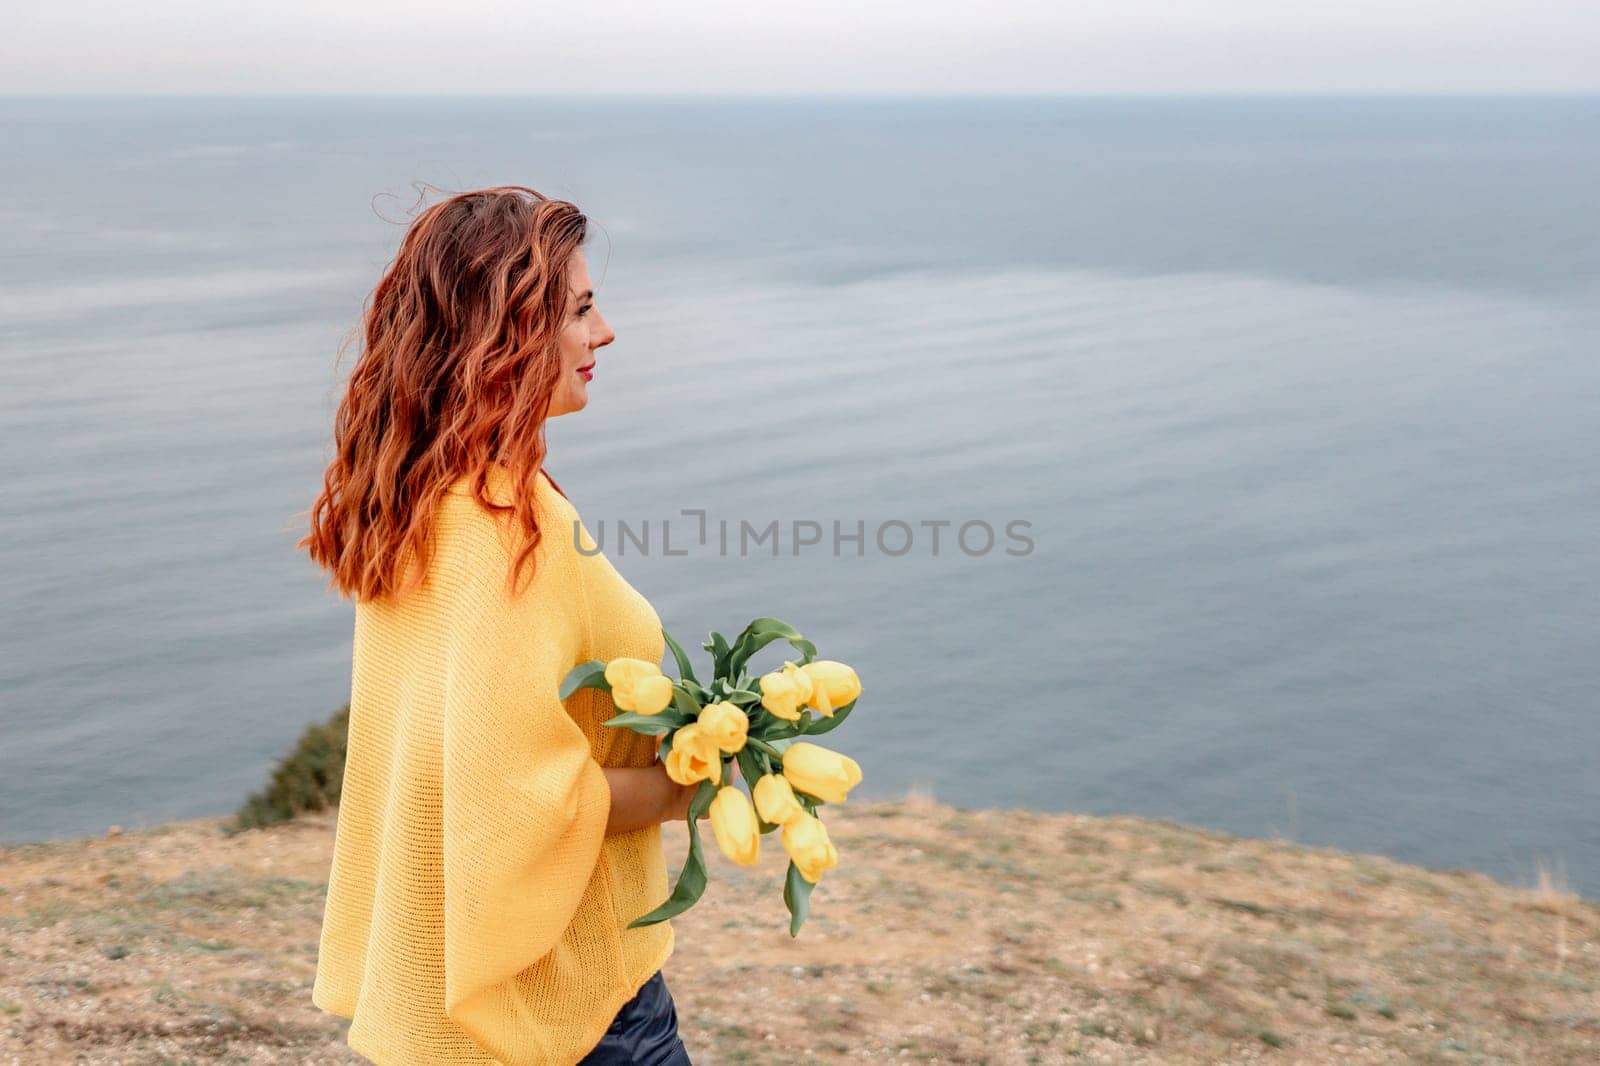 Rear view of a woman with long hair against a background of mountains and sea. Holding a bouquet of yellow tulips in her hands, wearing a yellow sweater by Matiunina